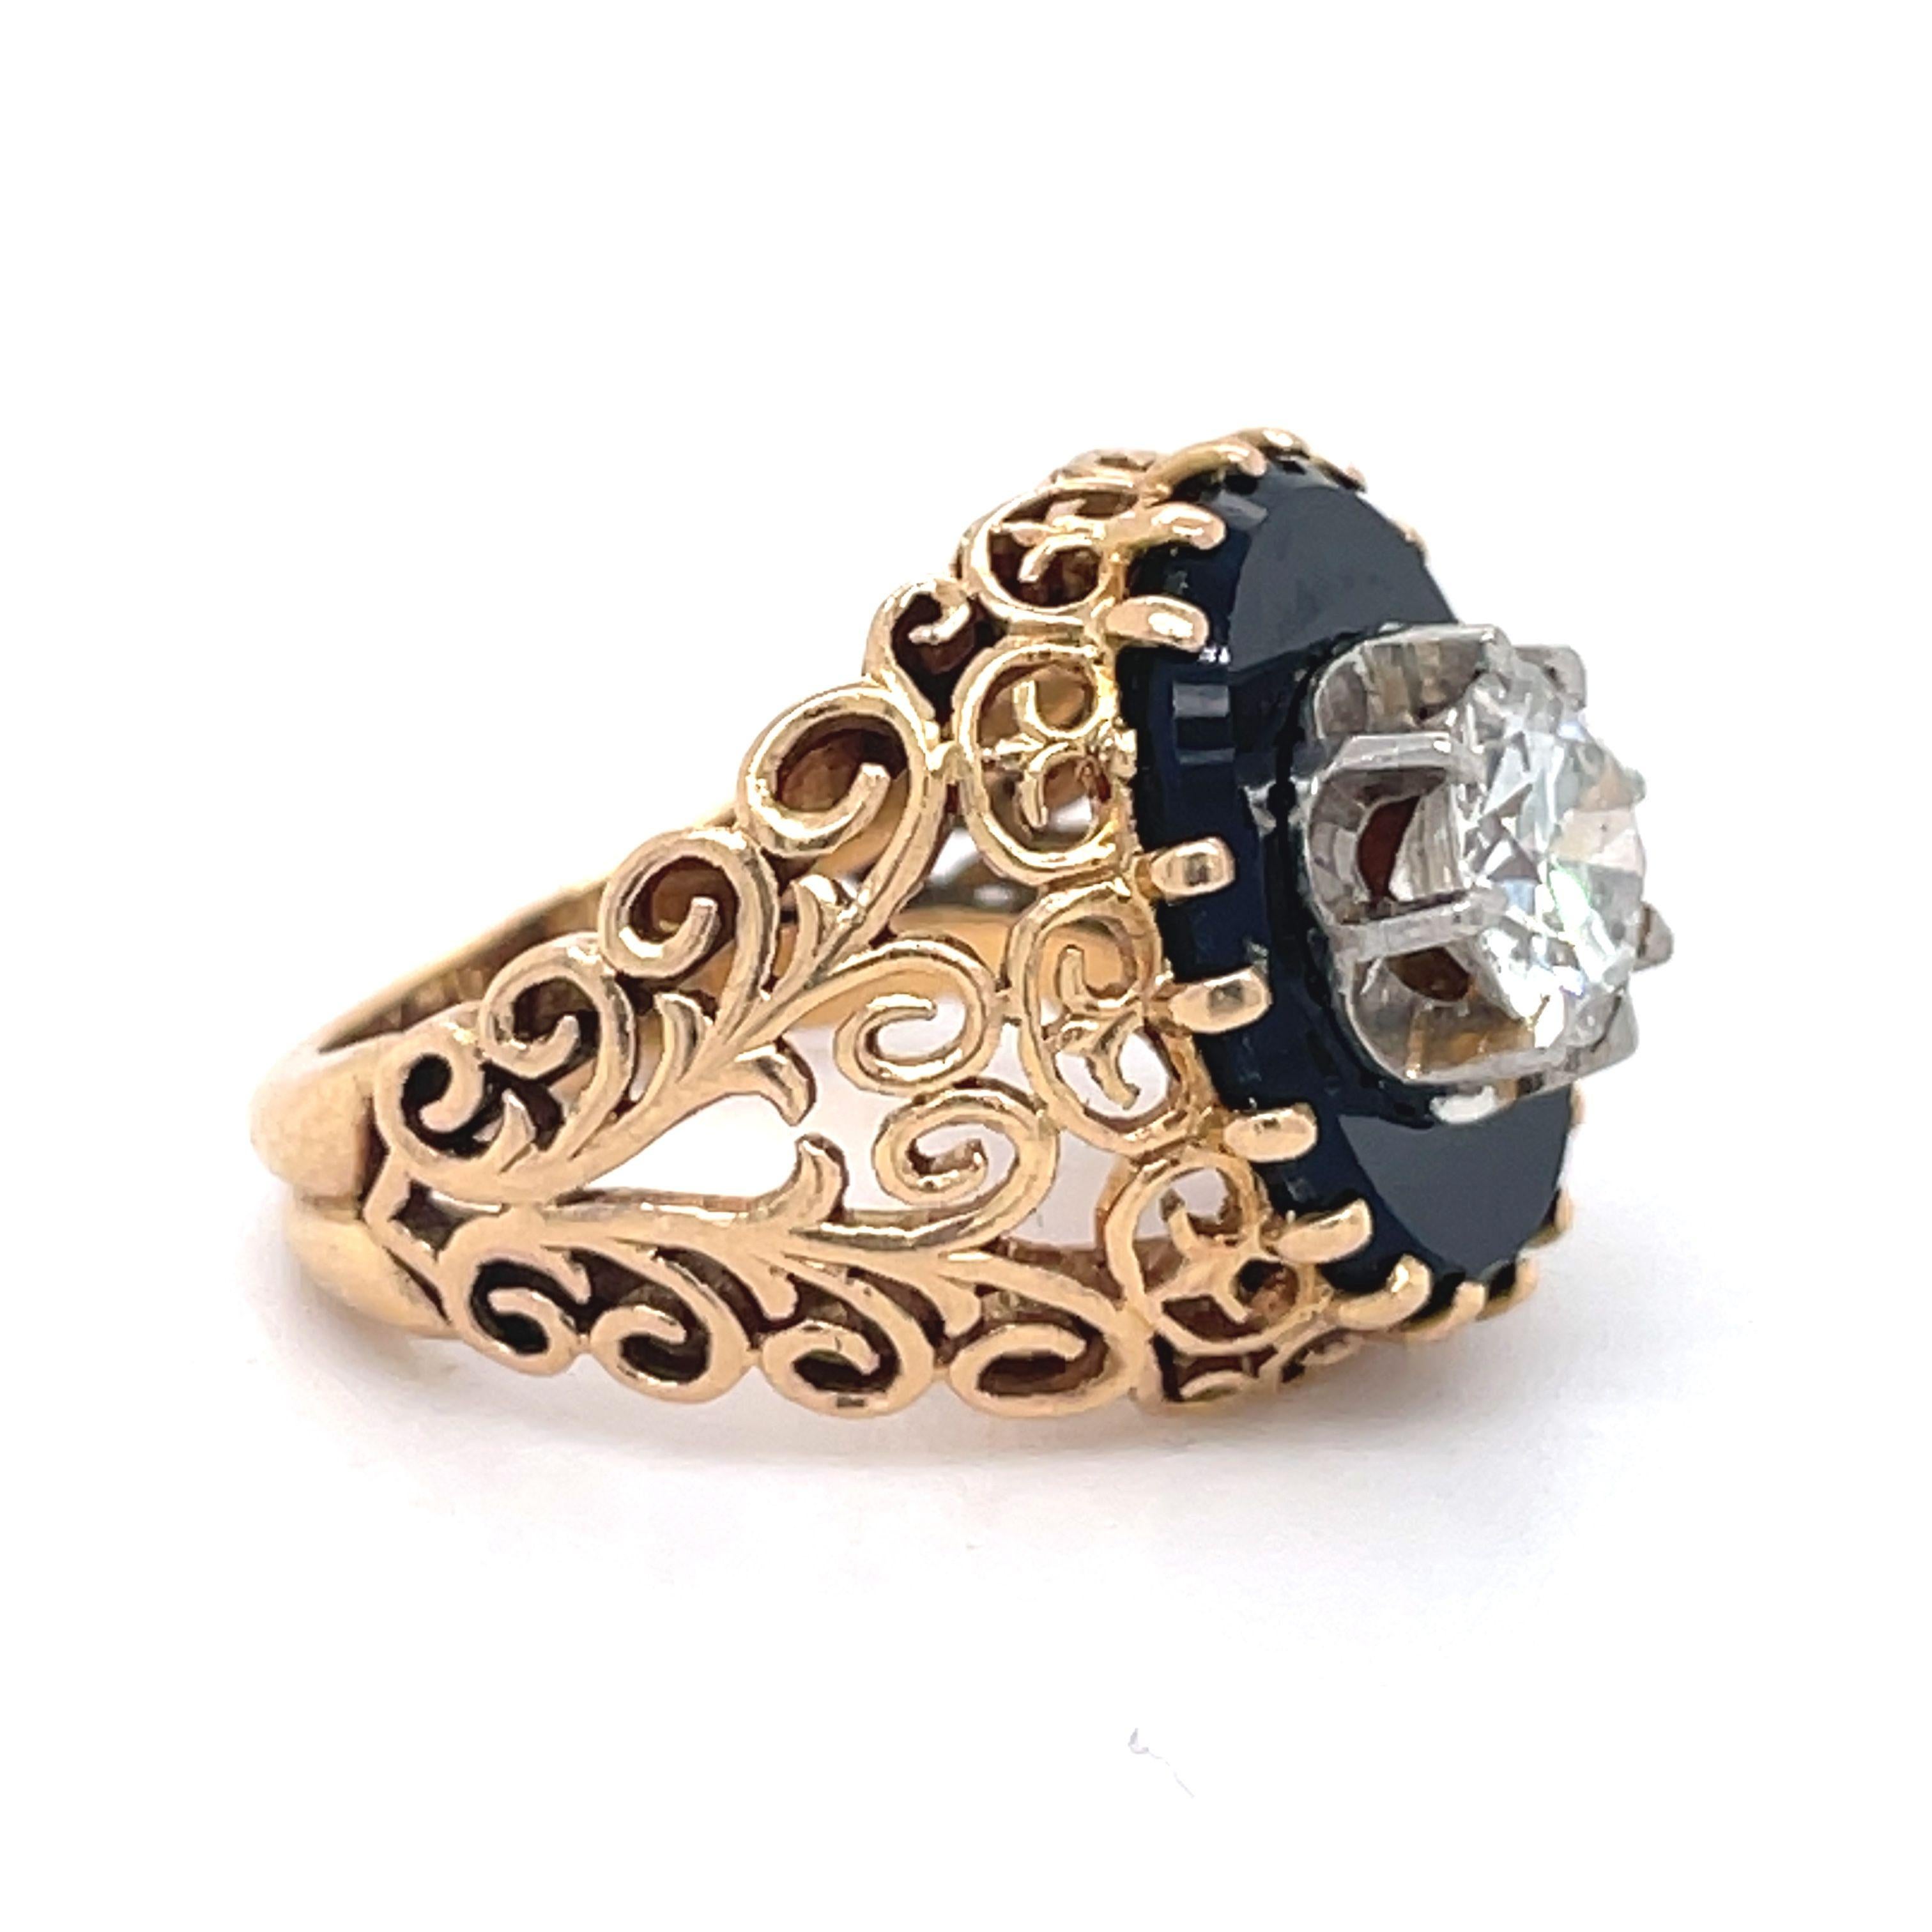 Filigree Ring- Vintage Onyx and Diamond Ring, 1ct Round Diamond, 18k Yellow Gold For Sale 2